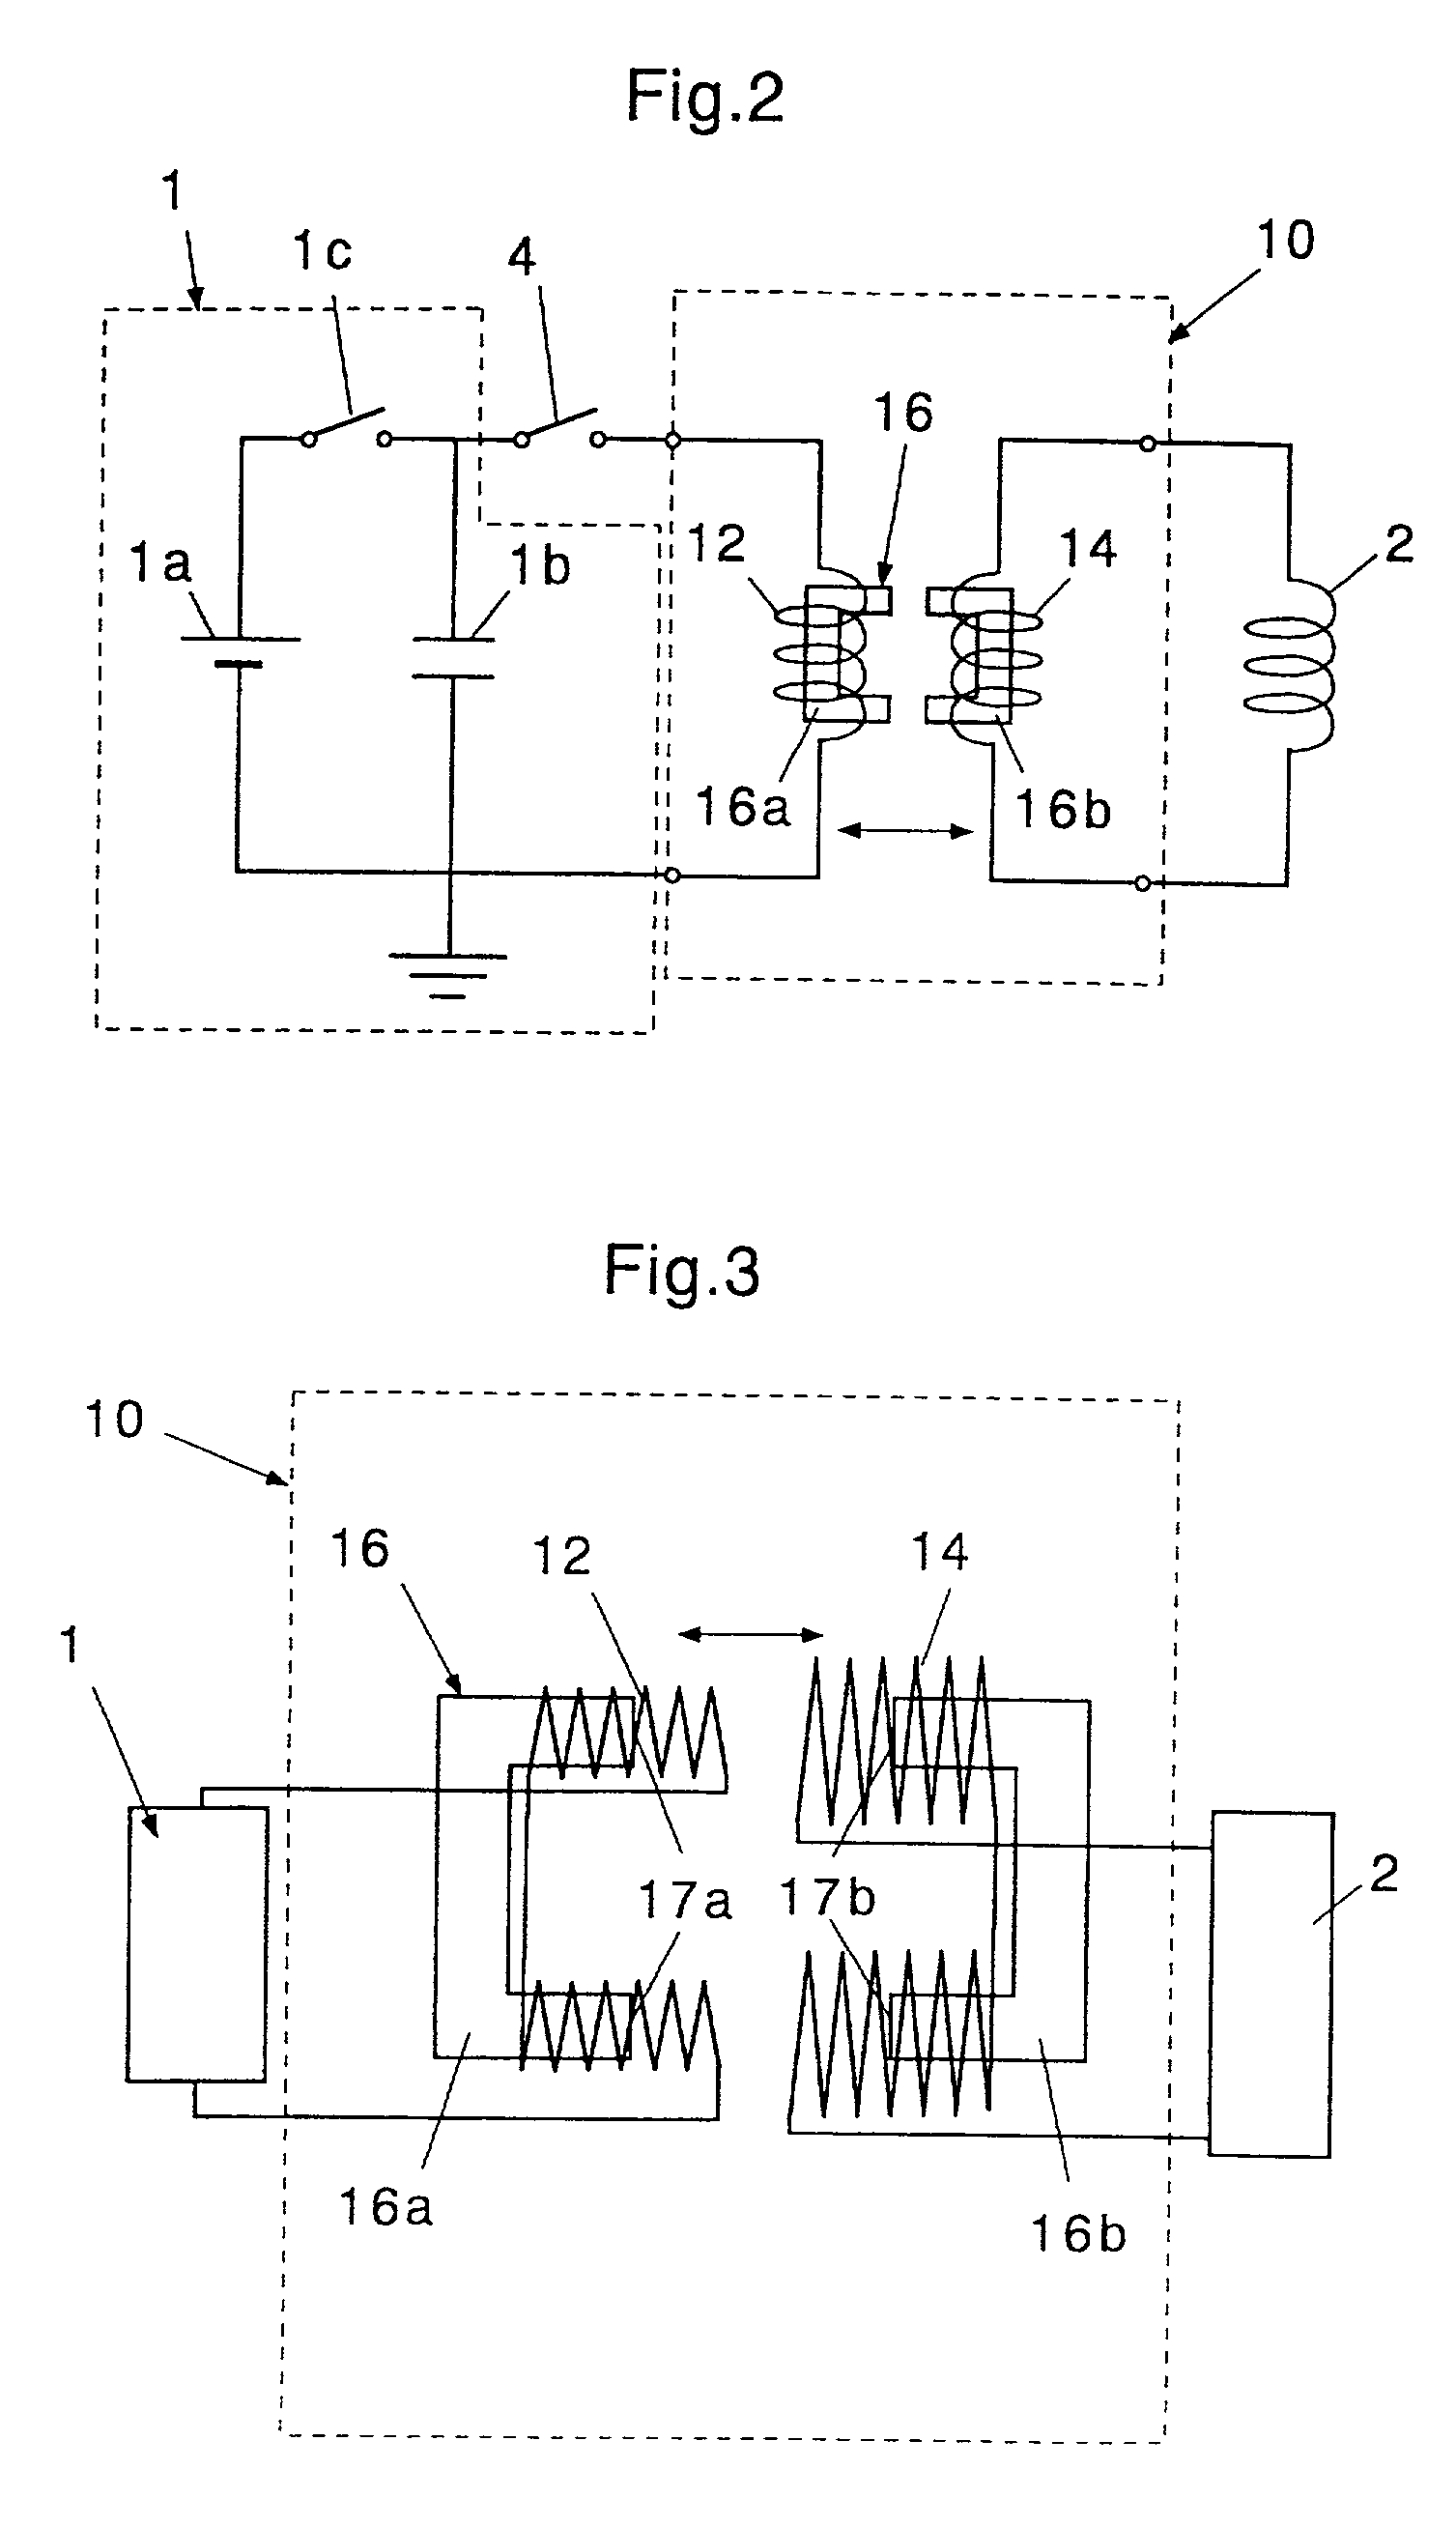 Electromagnetic connecting device for high voltage and large current